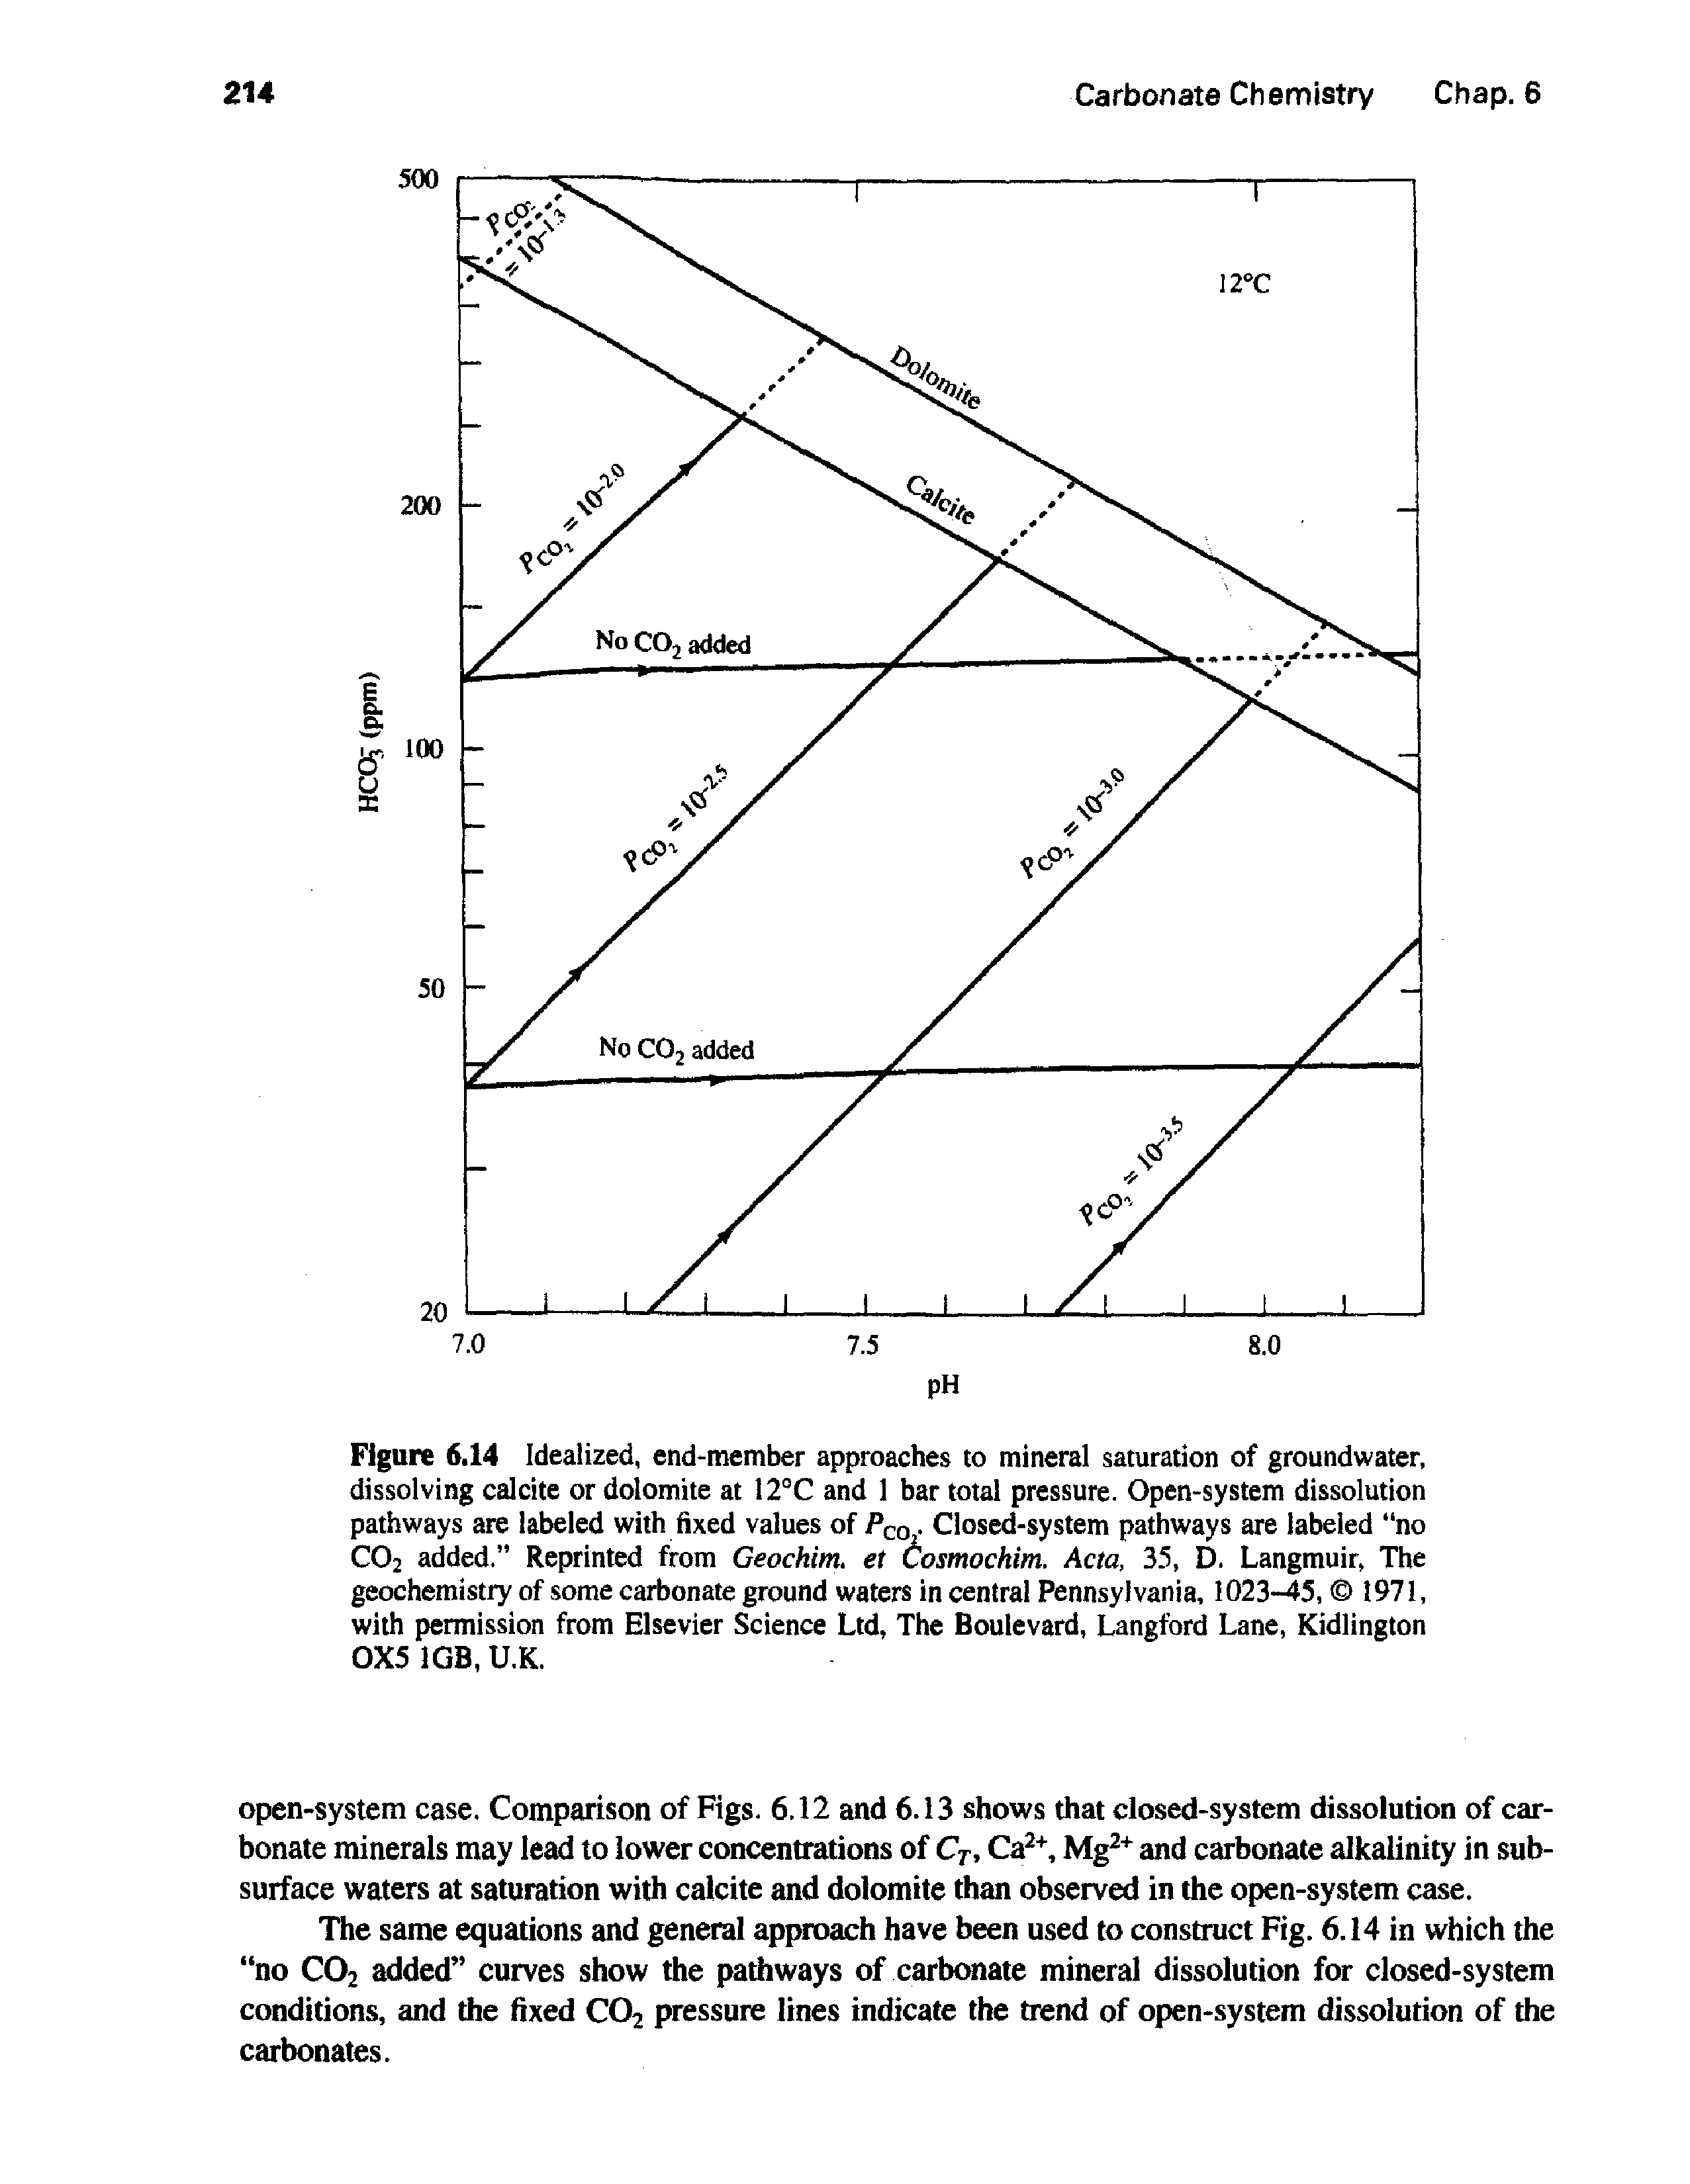 Figure 6.14 Idealized, end-member approaches to mineral saturation of groundwater, dissolving calcite or dolomite at 12°C and 1 bar total pressure. Open-system dissolution pathways are labeled with hxed values of PCOj- Closed-system pathways are labeled no CO2 added. Reprinted from Geochim. et Cosmochim. Acta, 35, D. Langmuir, The geochemistry of some carbonate ground waters in central Pennsylvania, 1023-45, 1971, with permission from Elsevier Science Ltd, The Boulevard, Langford Lane, Kidlington 0X5 1GB, U.K.